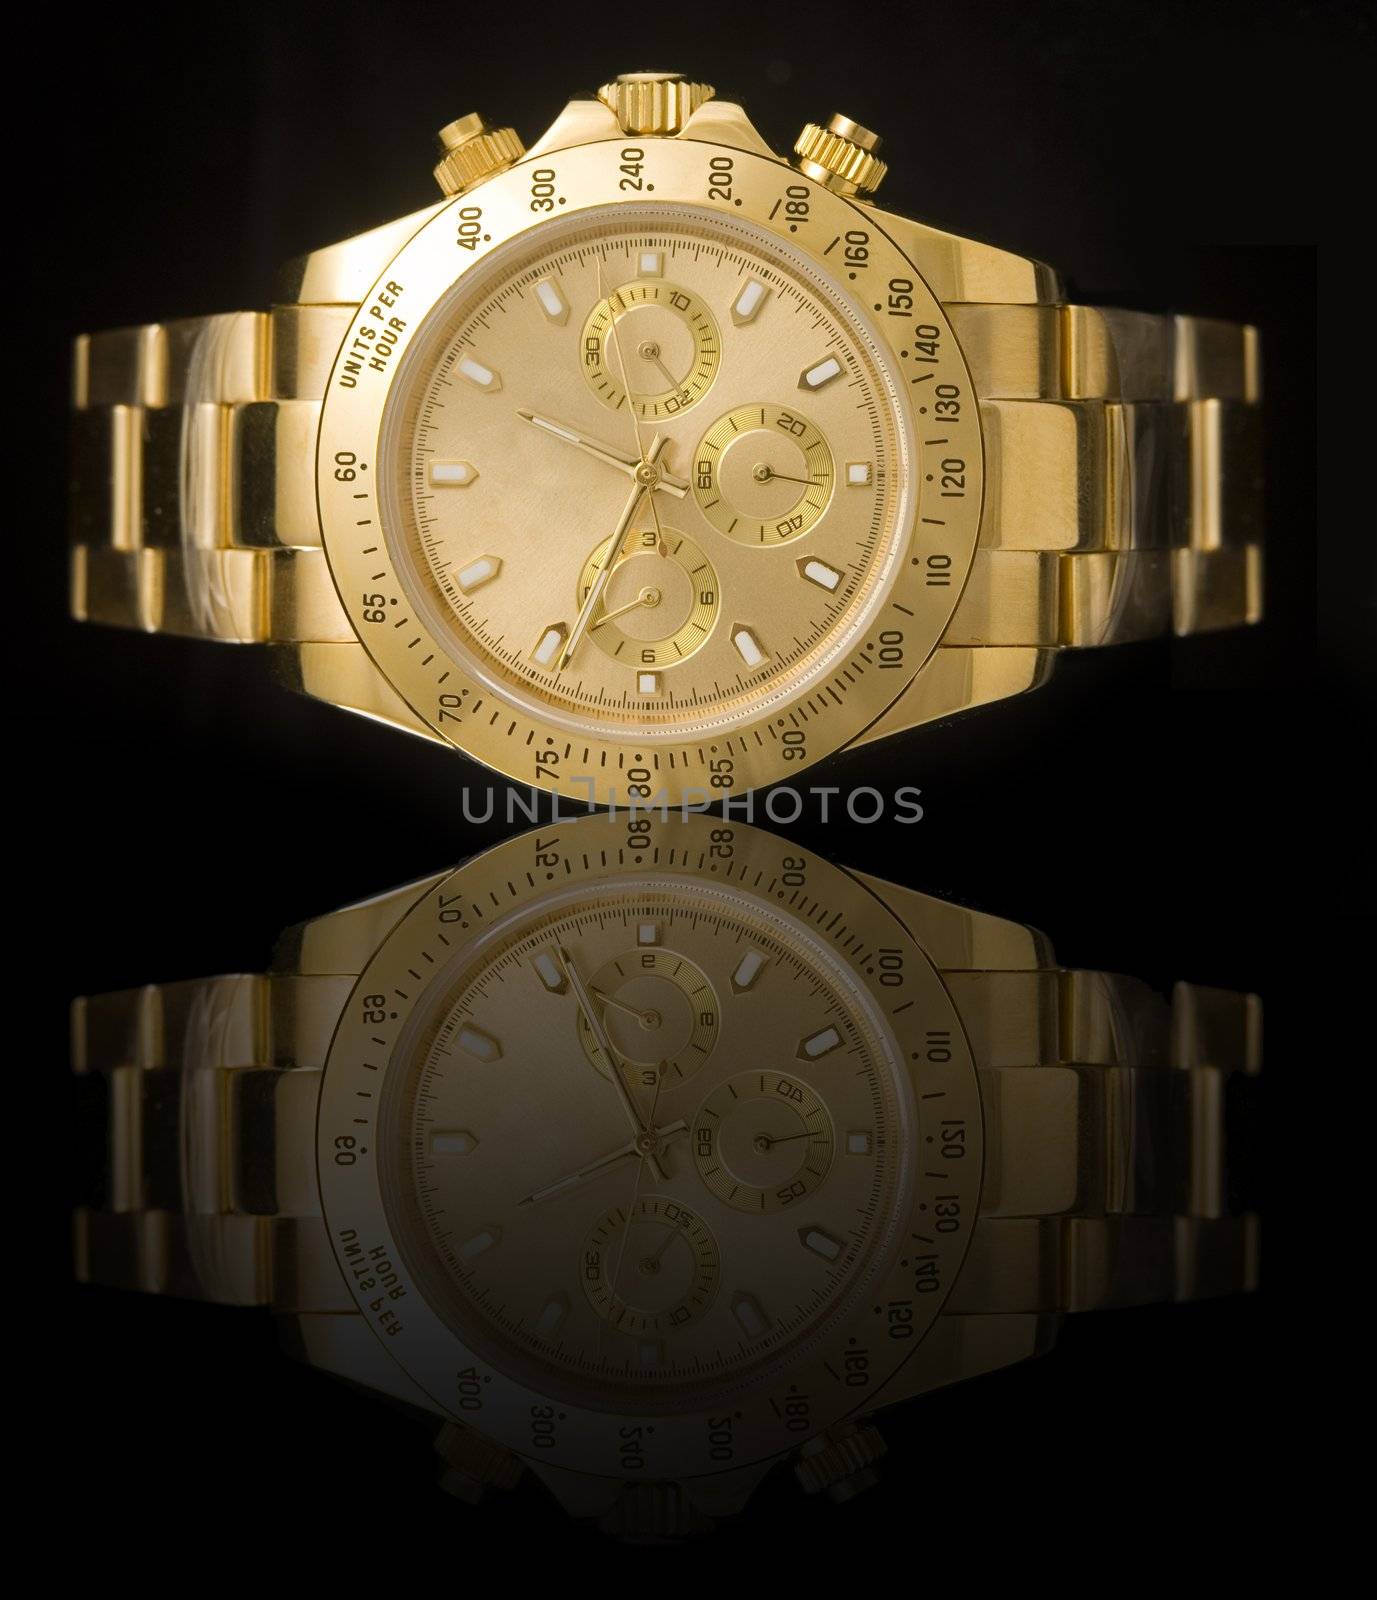 Luxury gold watch by johnnychaos